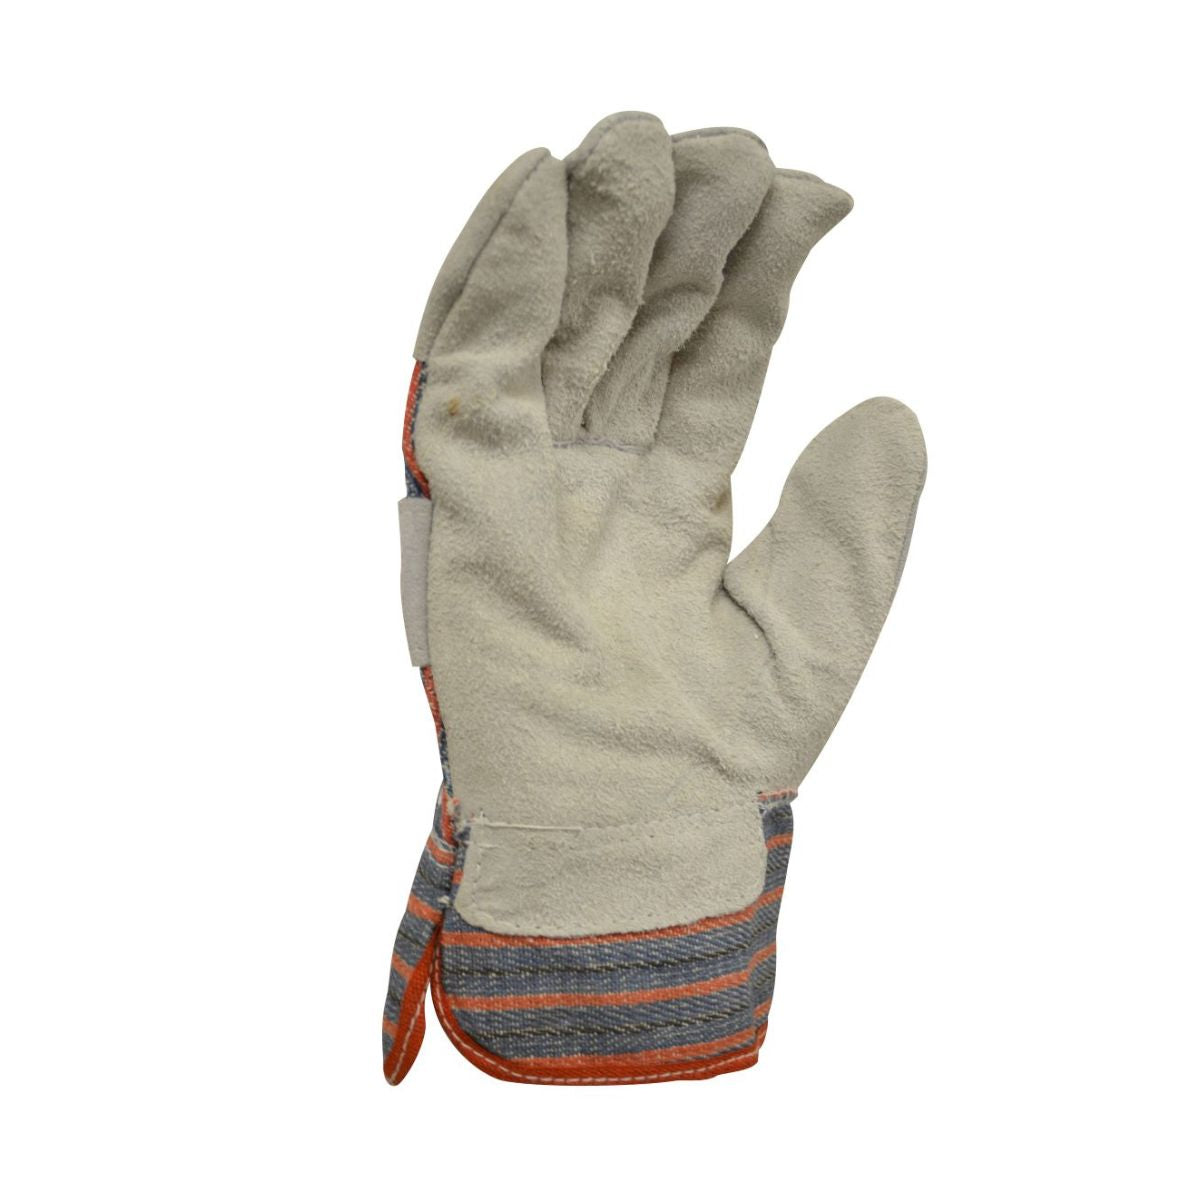 Candy Stripe Leather Glove GLC145 (Pack of 12 pairs)